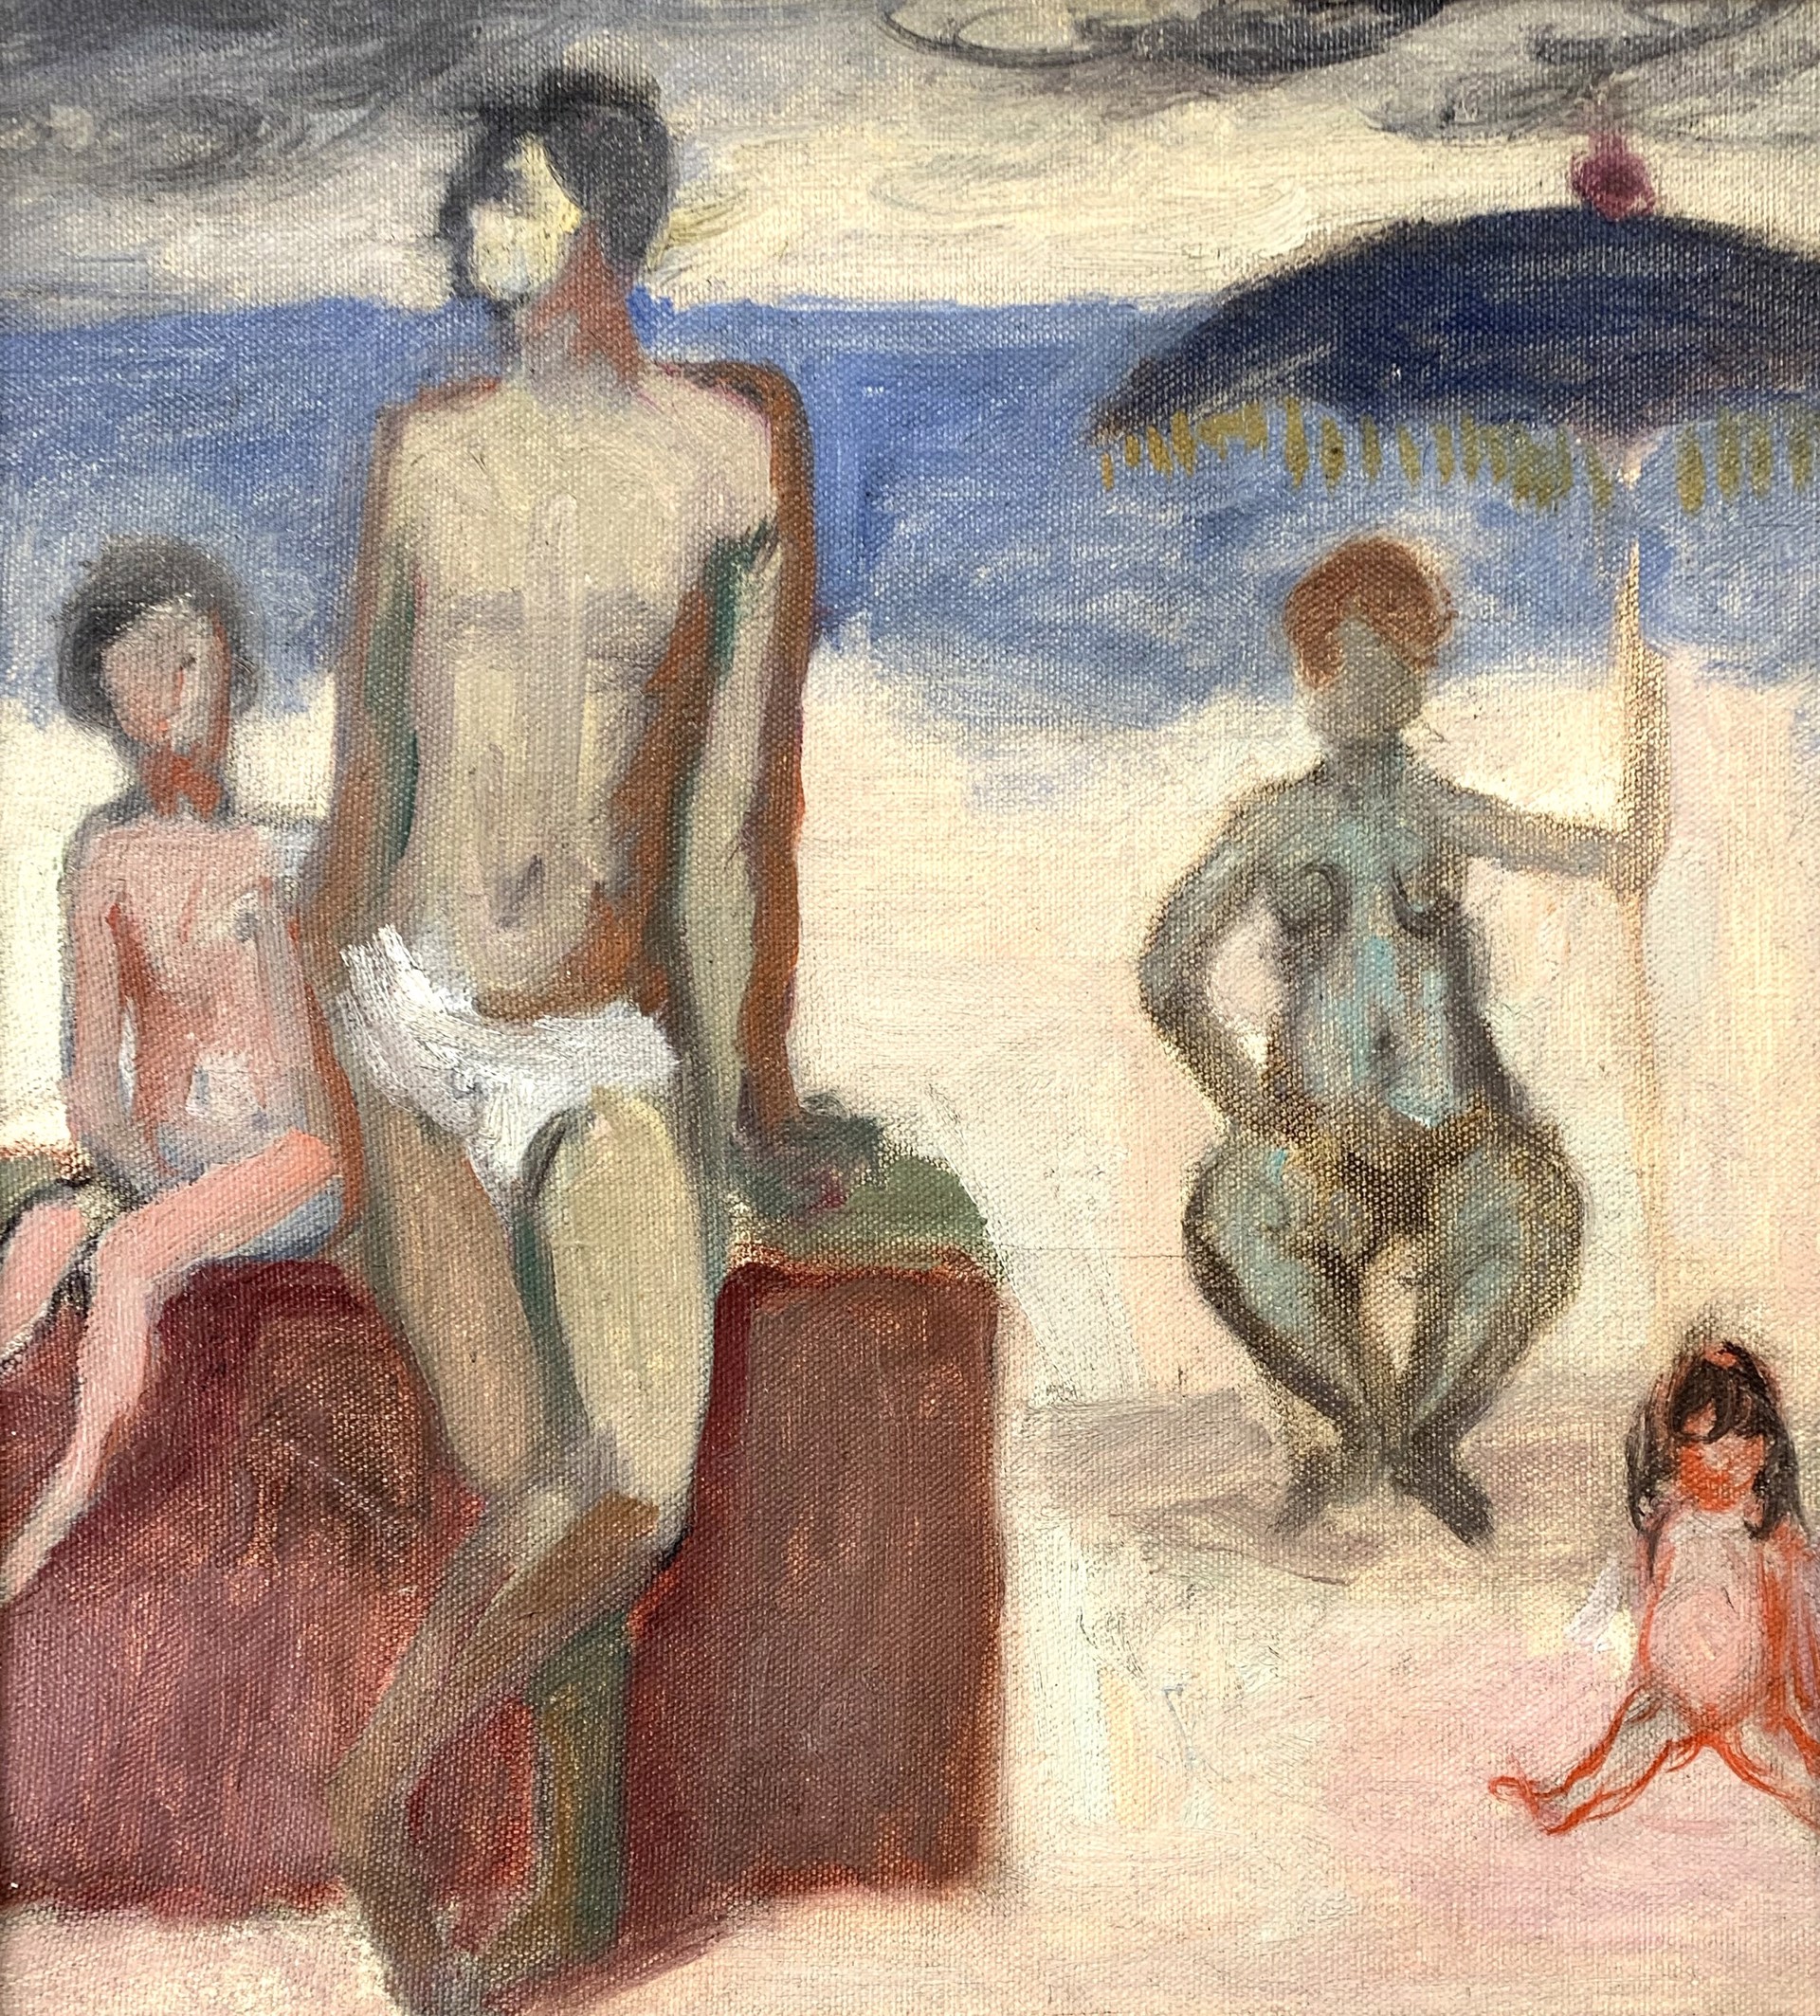 Nude Family by the Sea by Alvin Ross